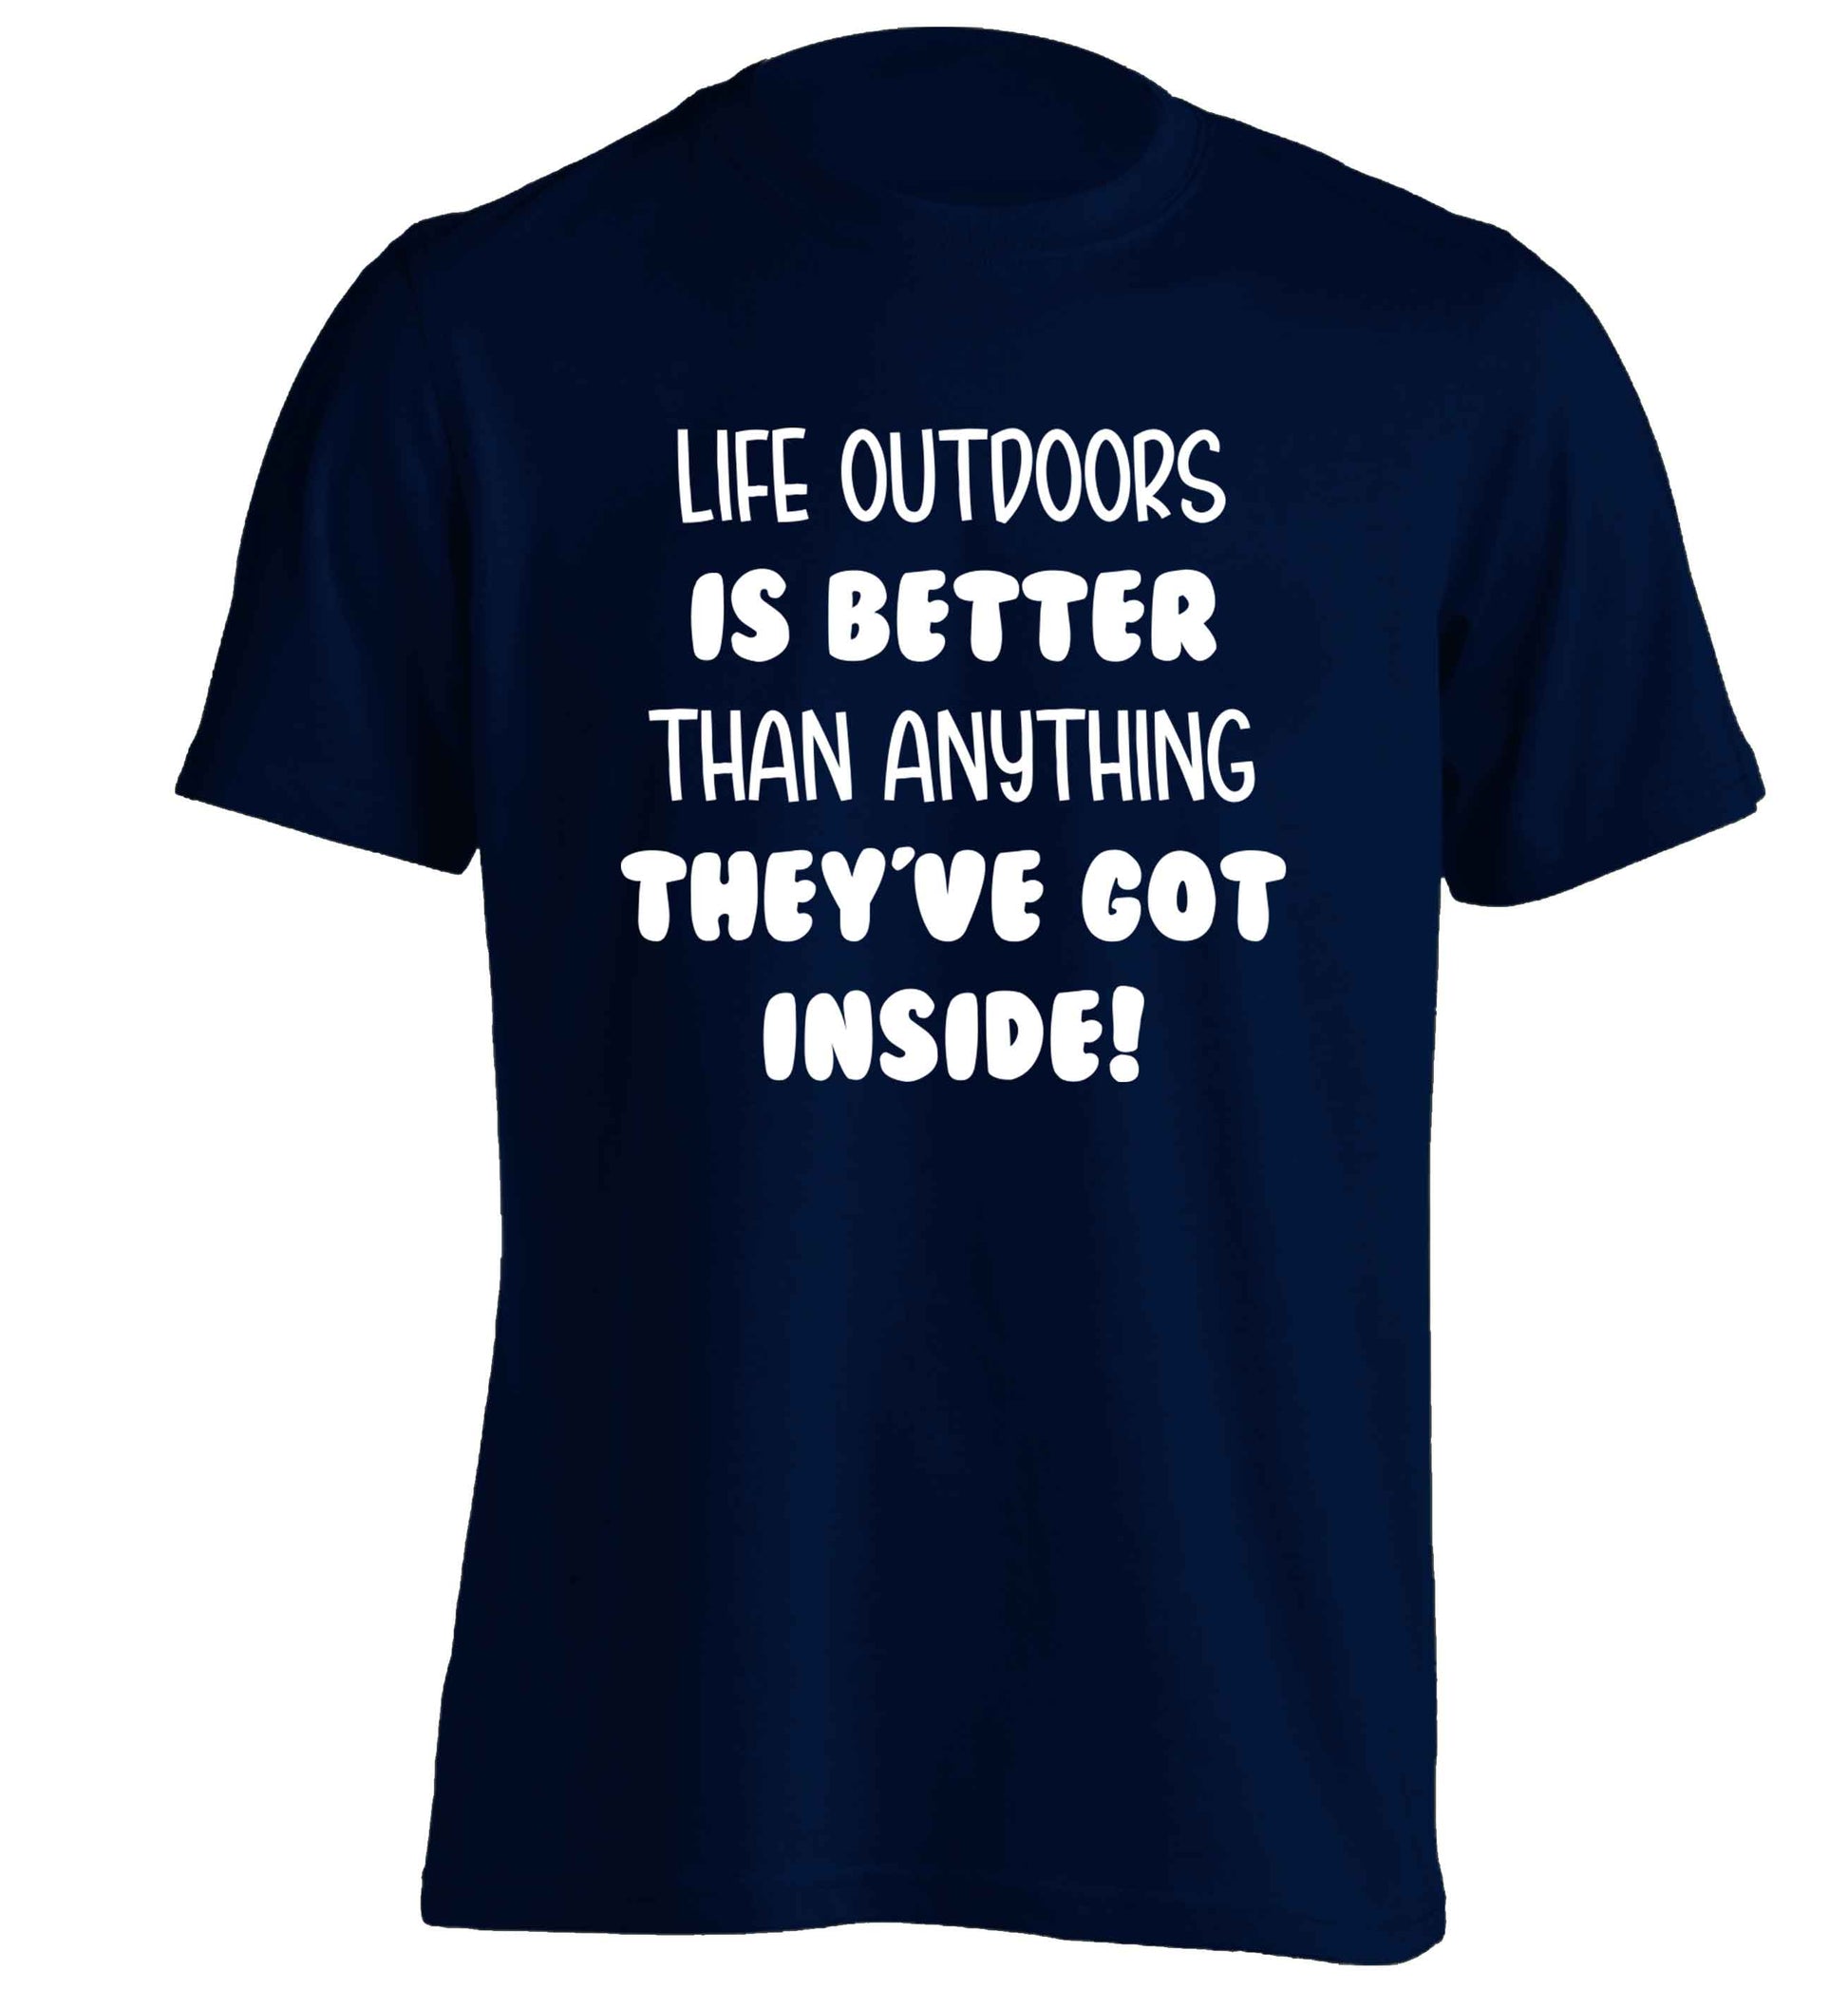 Life outdoors is better than anything they've go inside adults unisex navy Tshirt 2XL